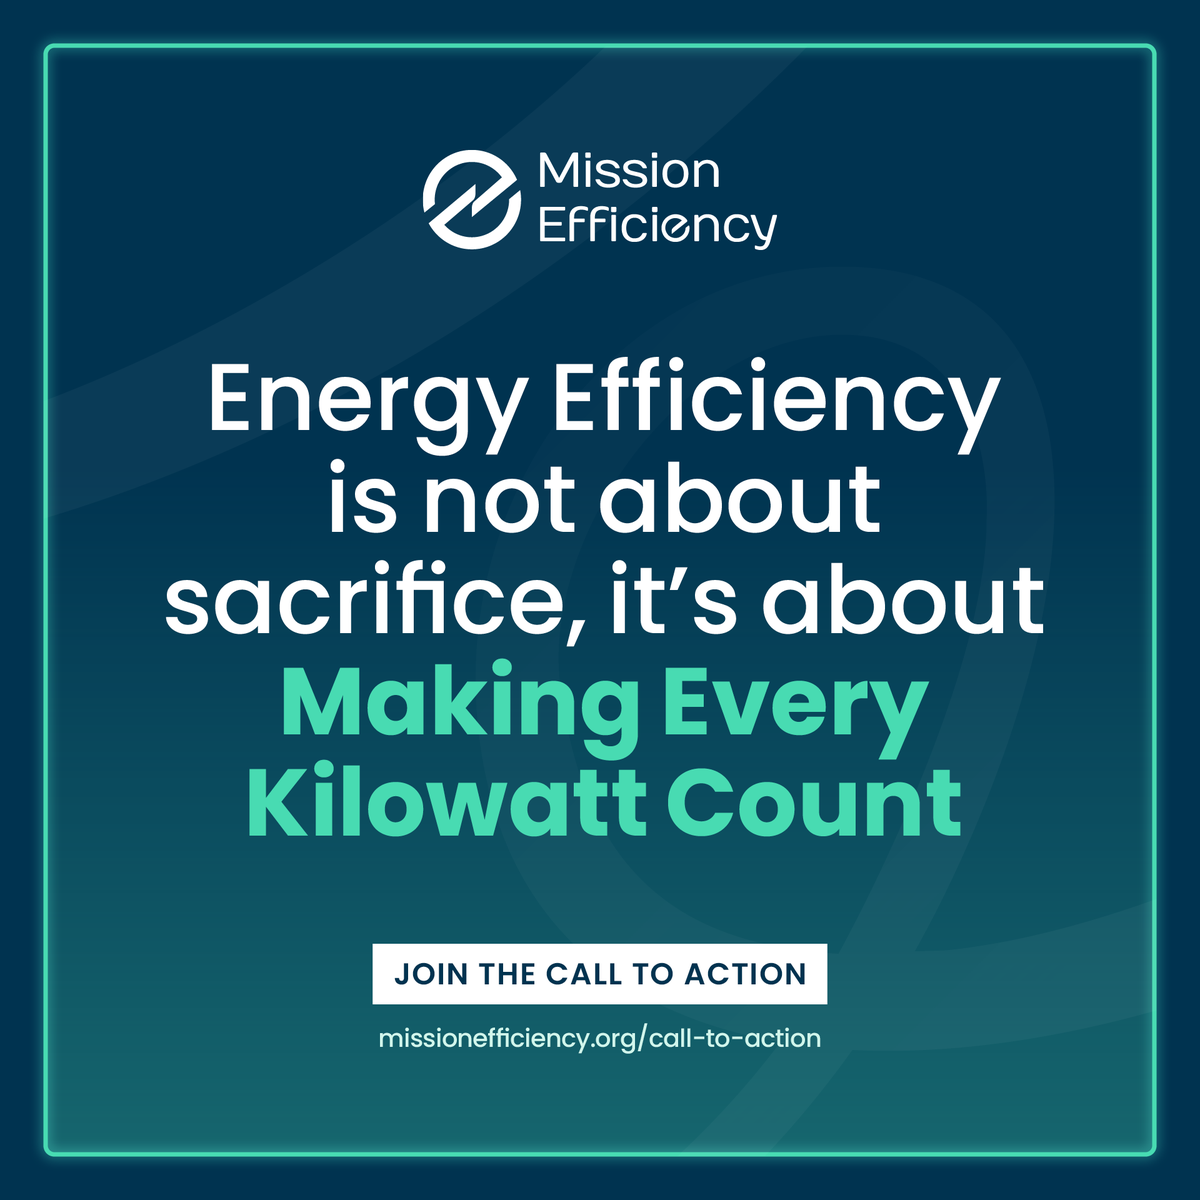 ⚡ #EnergyEfficiency is not about sacrifice; it’s about making every kilowatt count 💡 This #WorldEnergyEfficiencyDay, join us in calling for doubling down on efficiency by tripling investments to USD 1.8 trillion per year by 2030! 🔗 LEARN MORE: ➡️ missionefficiency.org